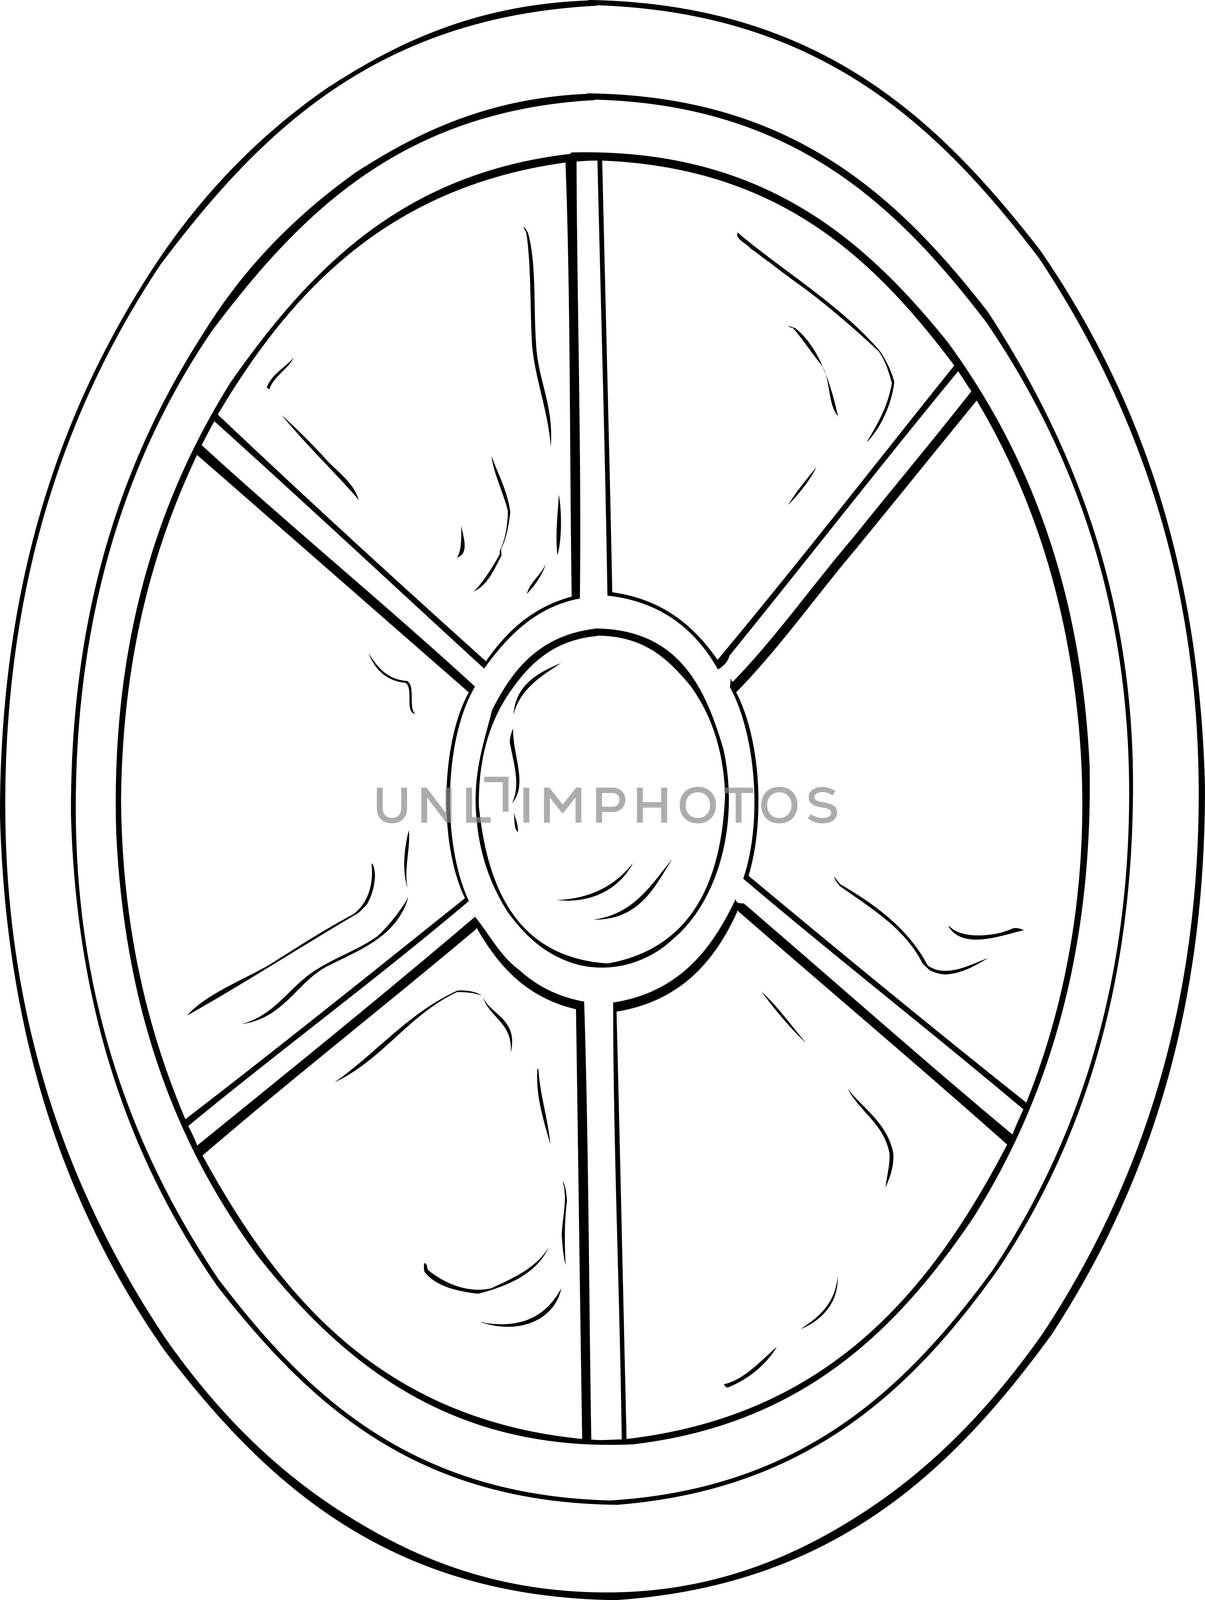 Outlined oval shaped window illustration by TheBlackRhino